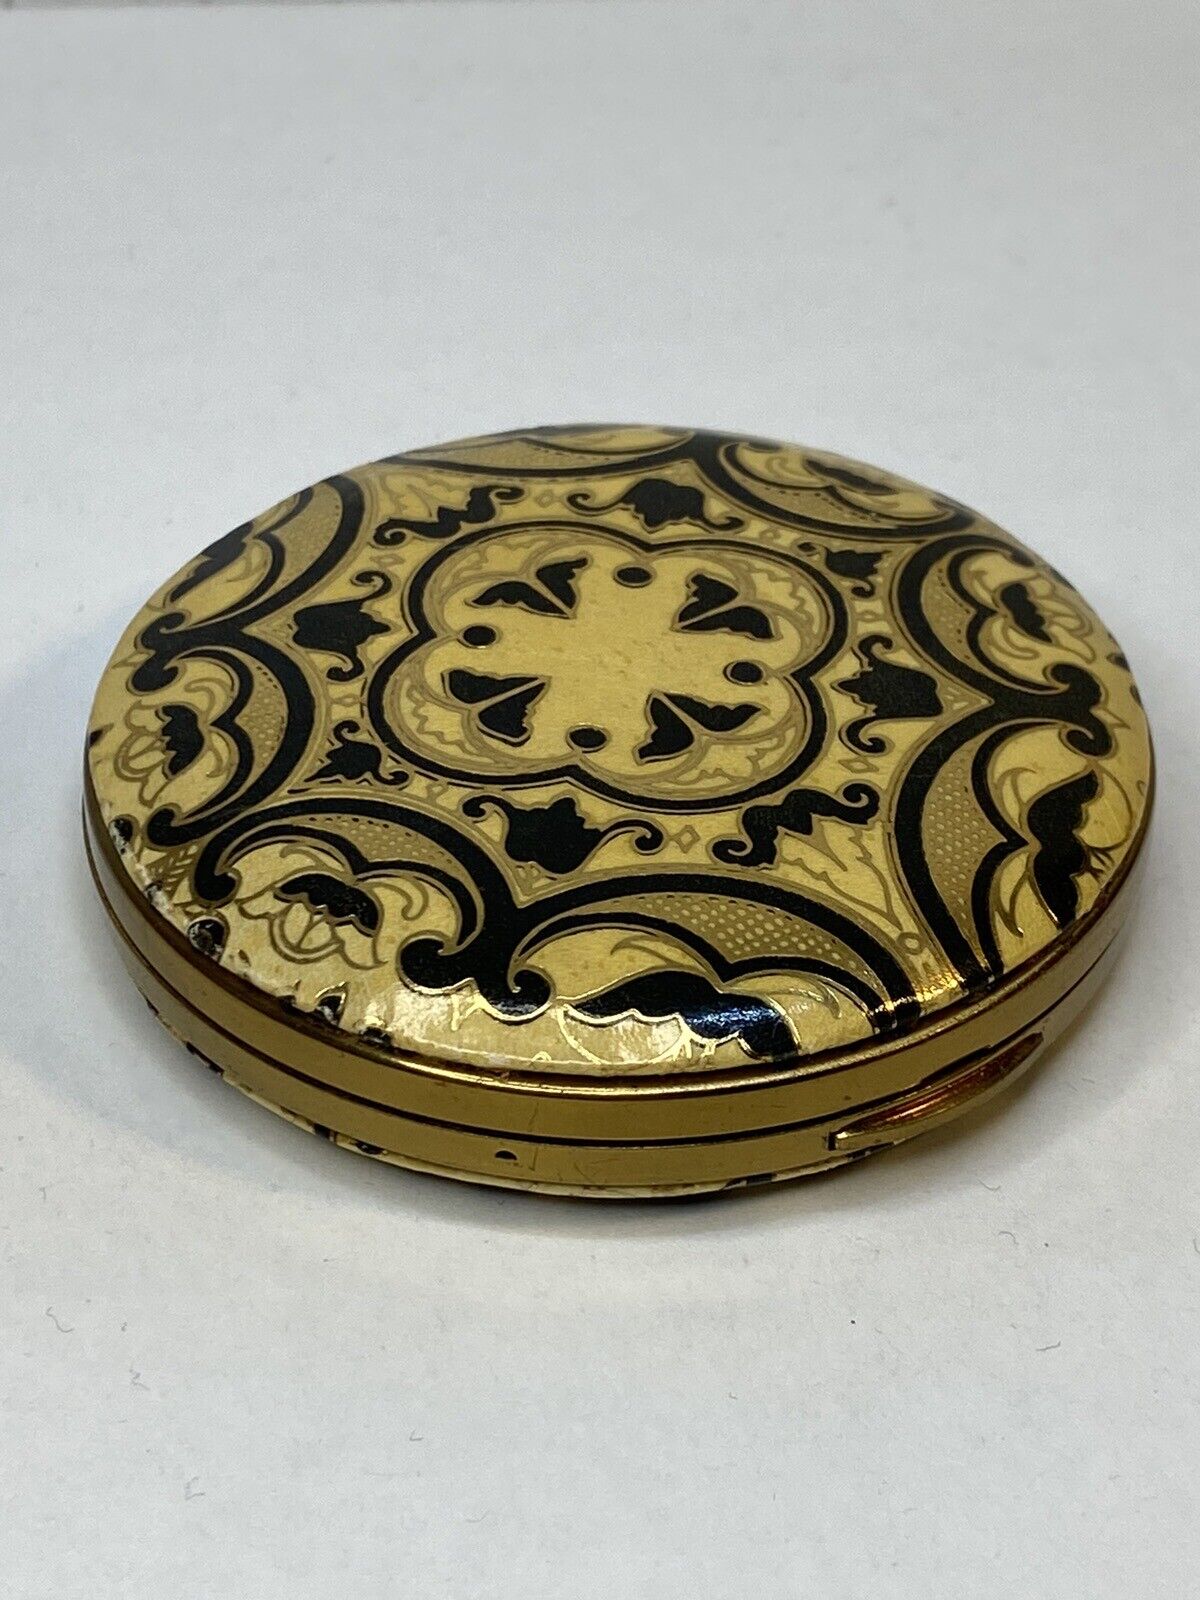 Vintage Beautiful Embossed Faux Leather Mirror Compact